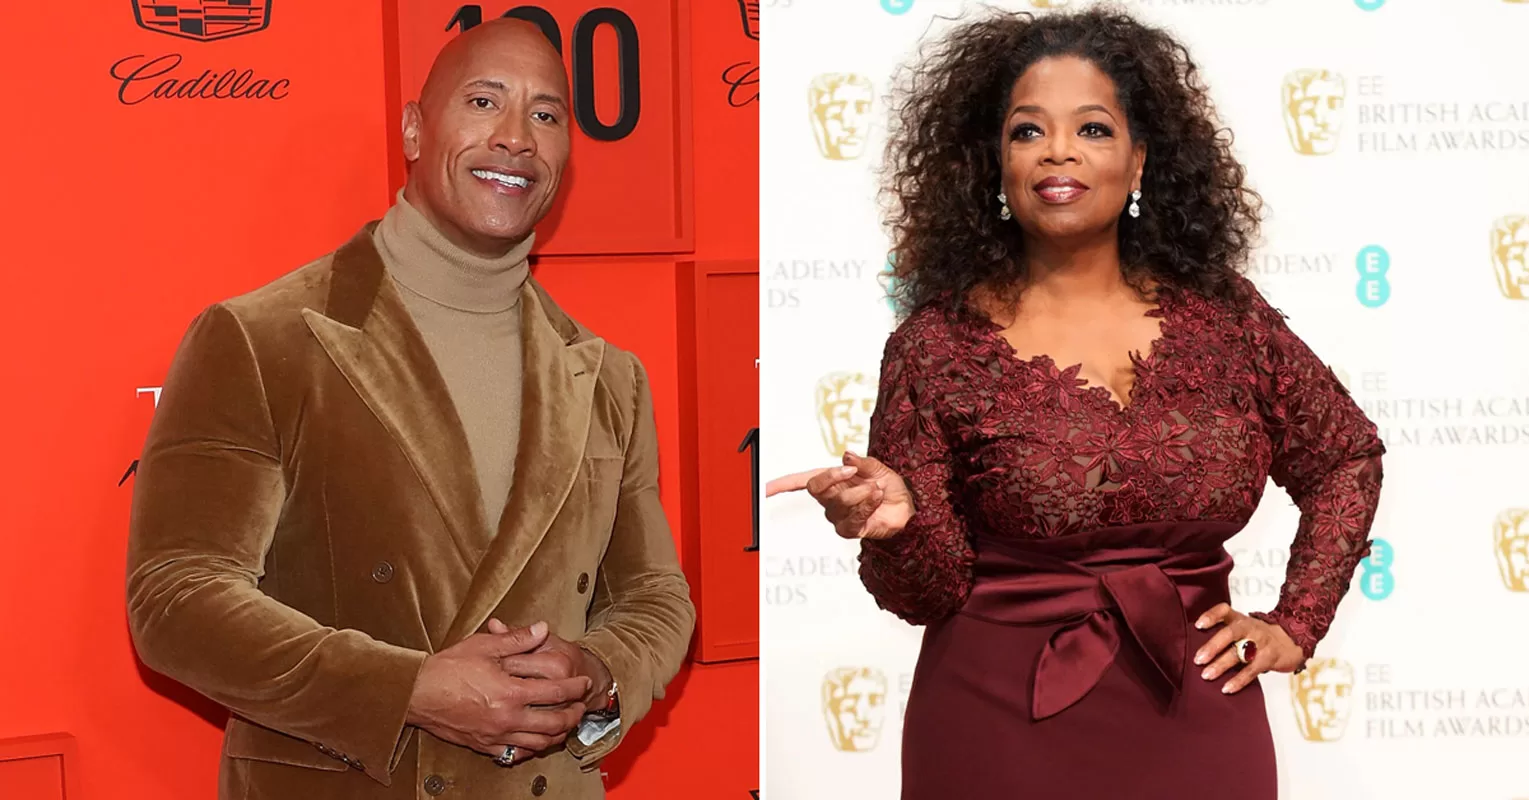 You are currently viewing Oprah Winfrey and Dwayne Johnson will give $10 million to those affected by the Maui fires